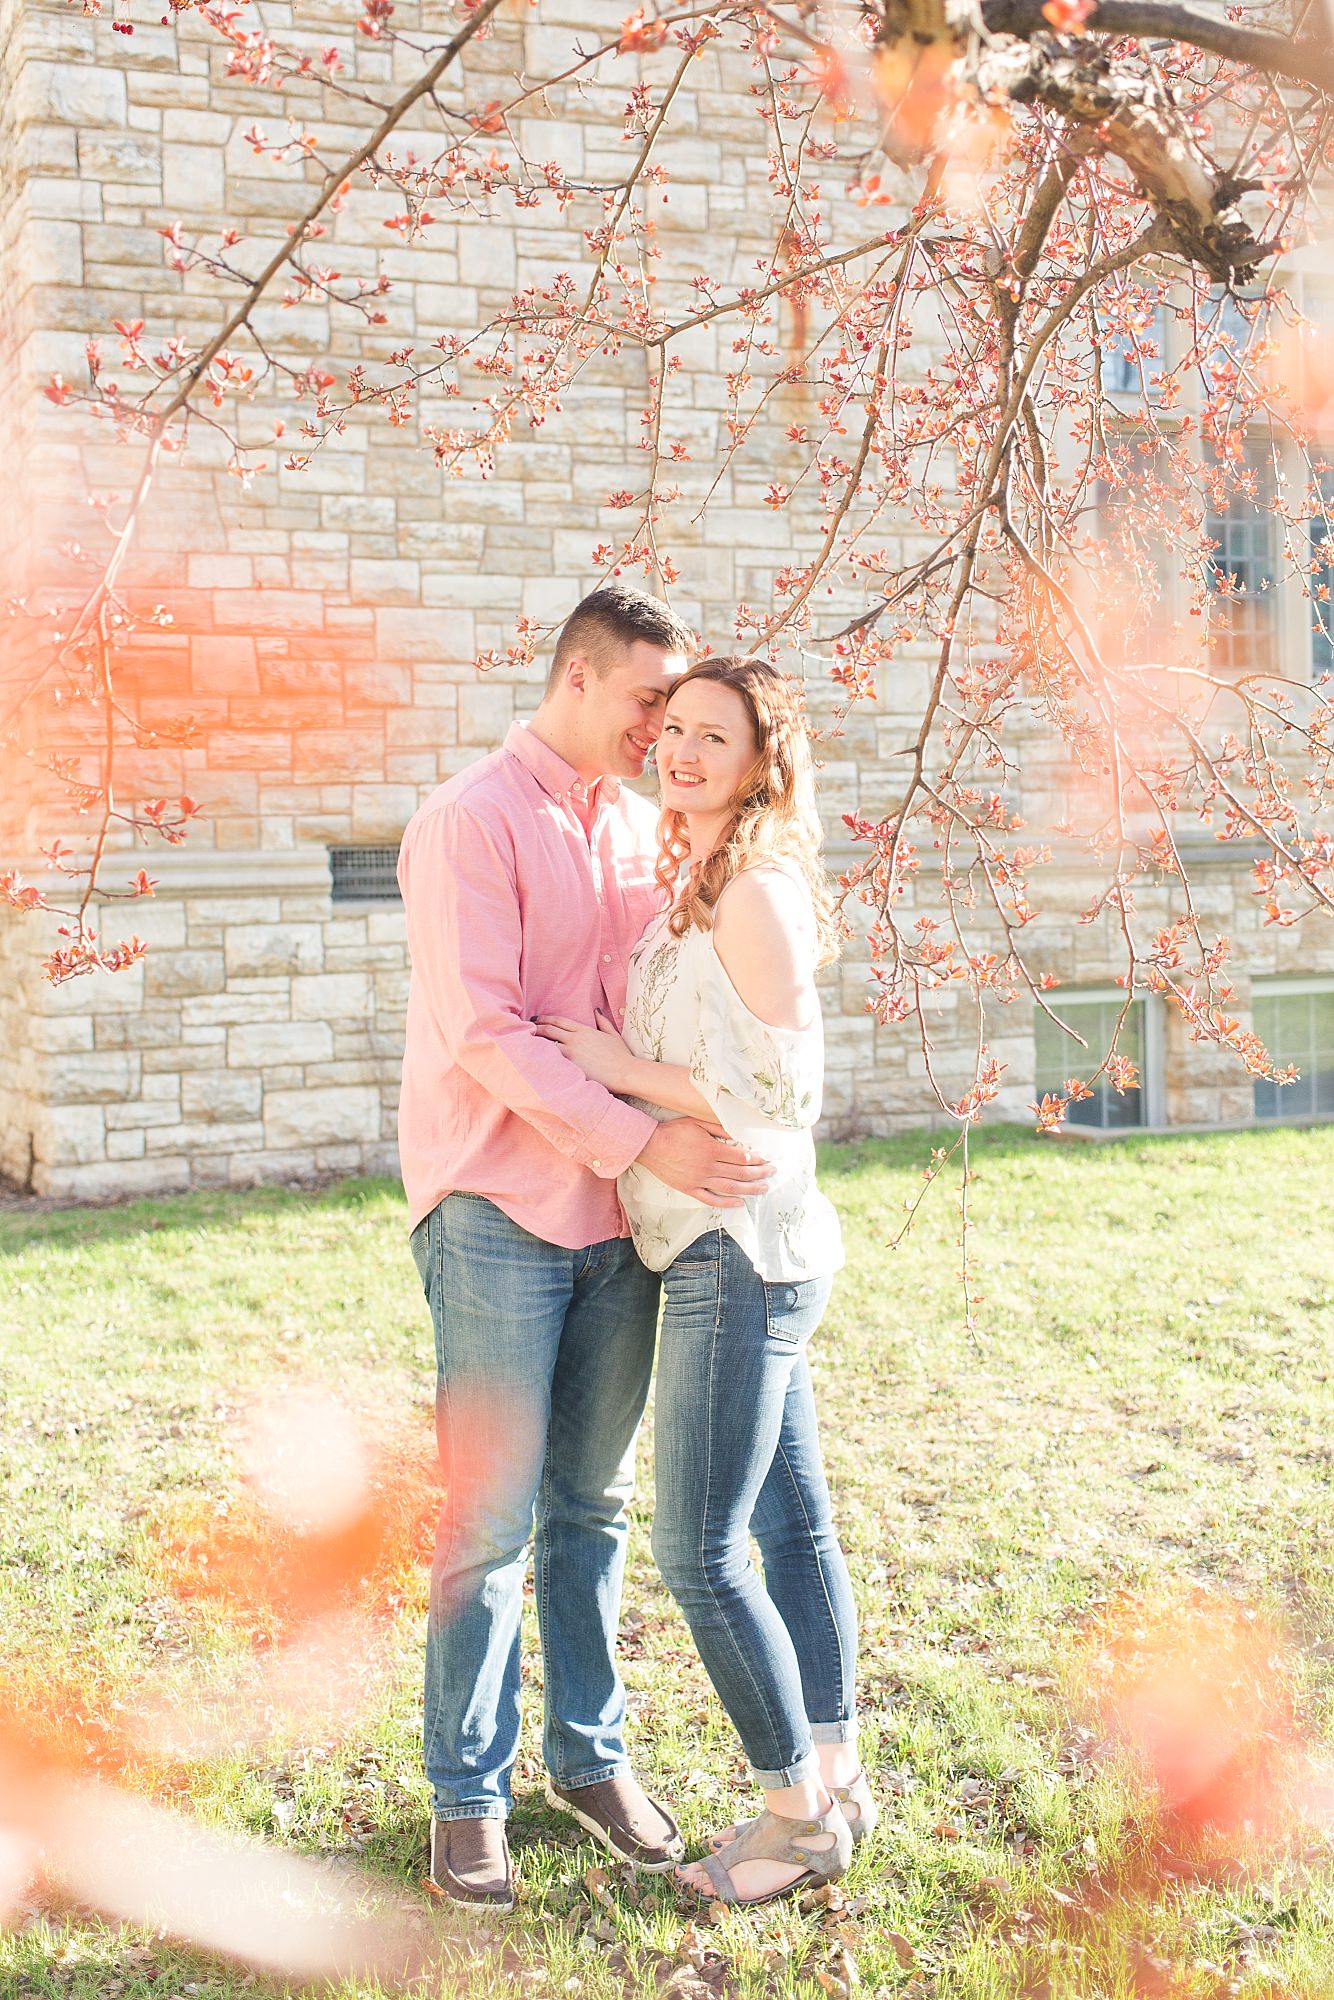 Spring Engagement Session in Shades of Pink Surrounded by Spring Blooms